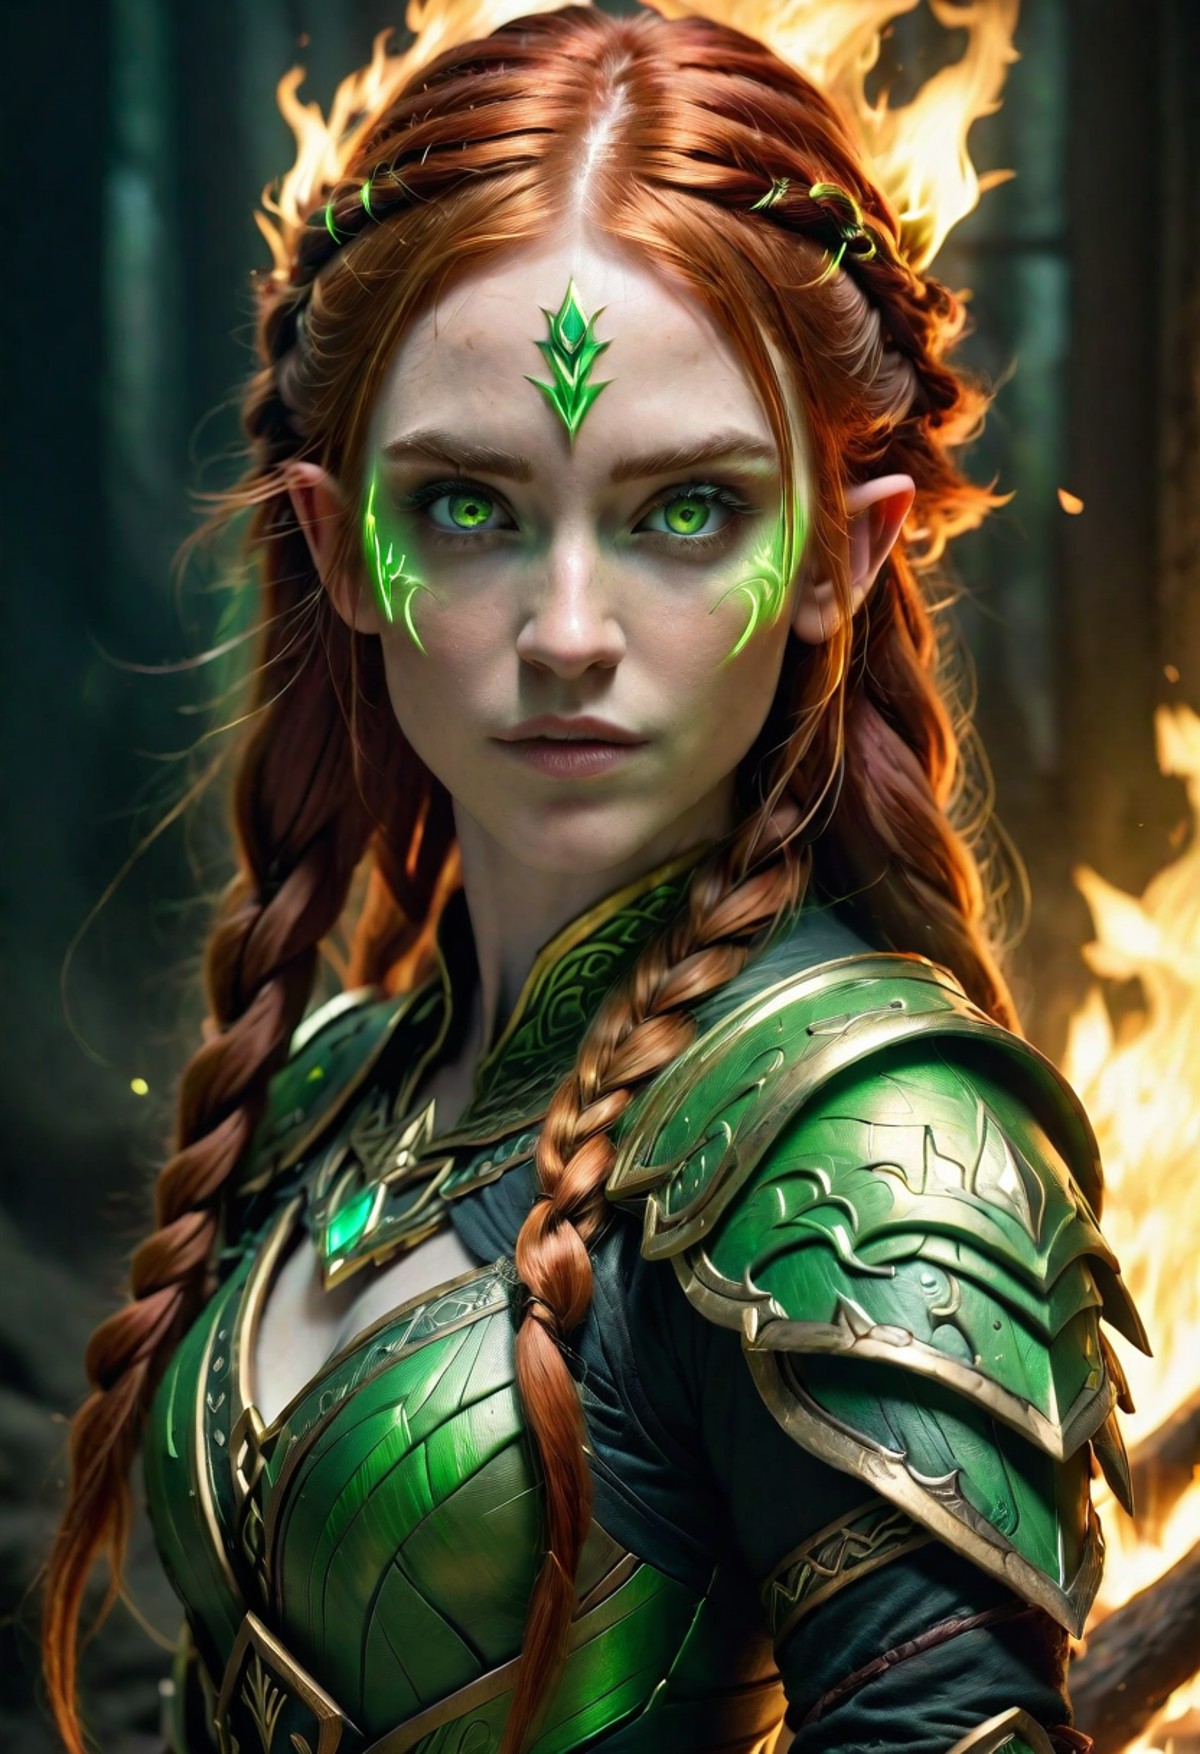 highly detailed photo of a red haired beautiful elf mage wearing green mage armor with her eyes glowing, long braided hair...